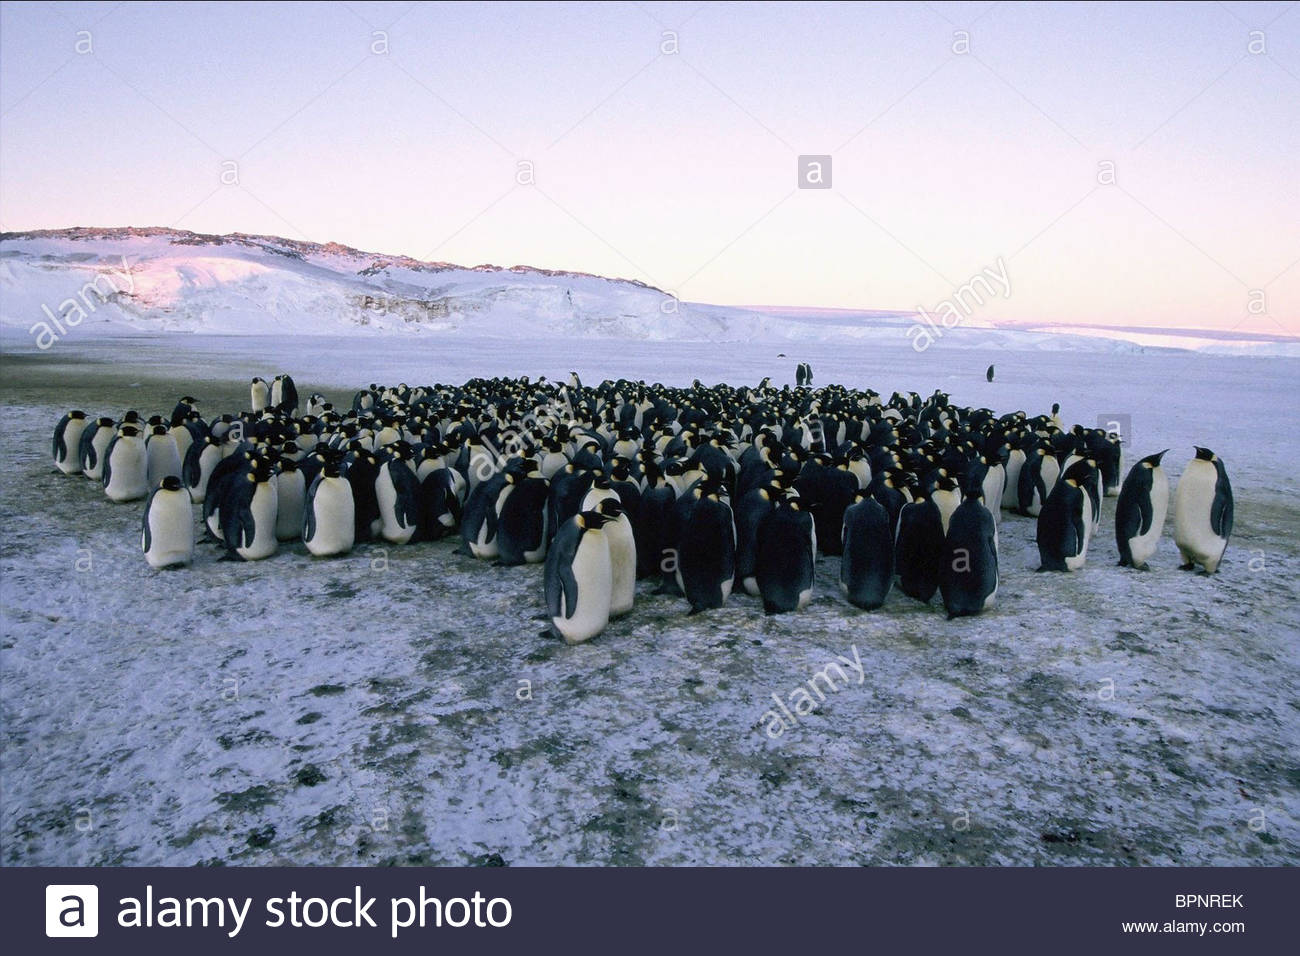 March Of The Penguins #6